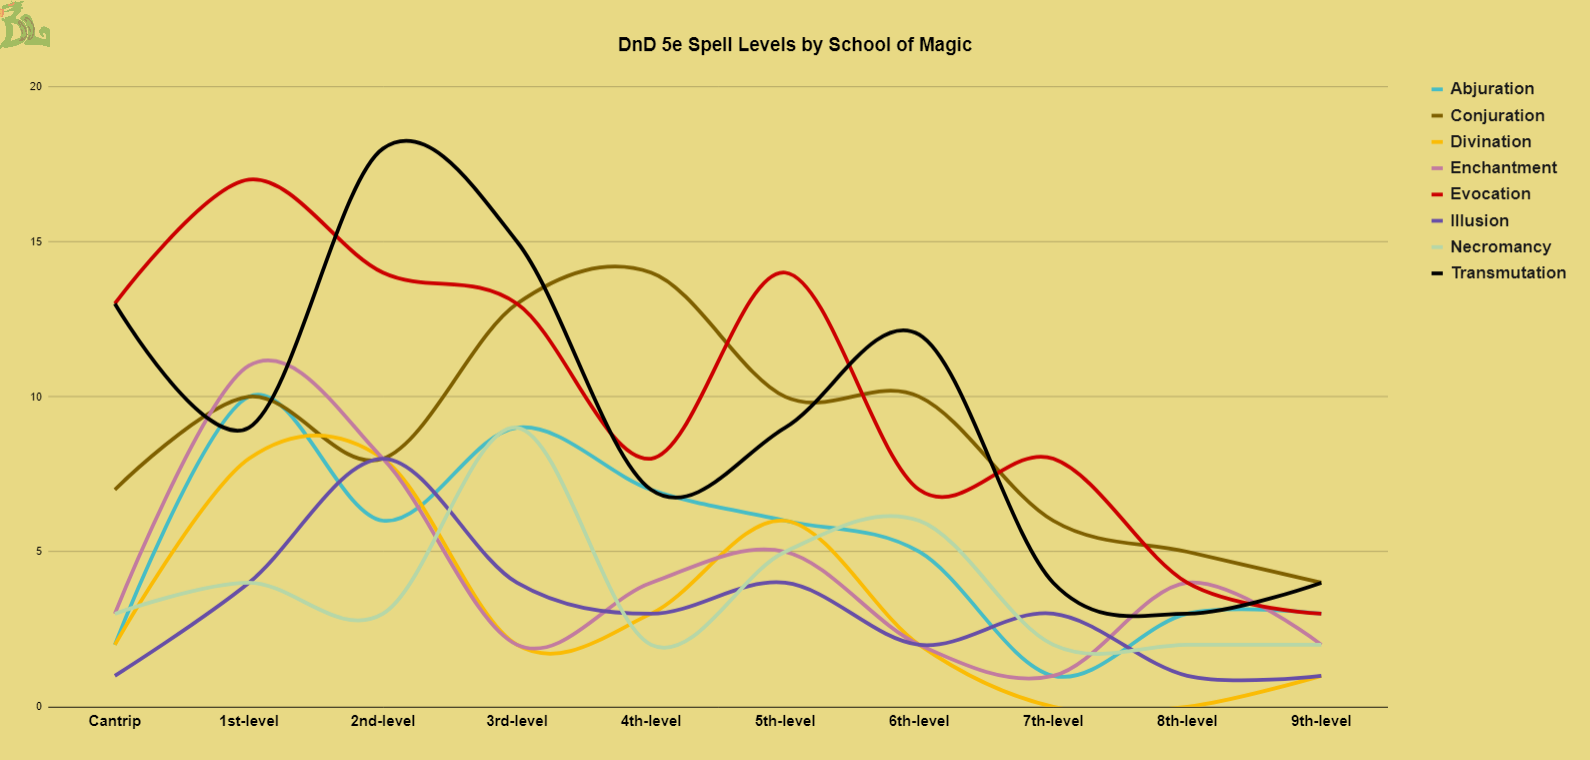 dnd 5e spell levels by school of magic